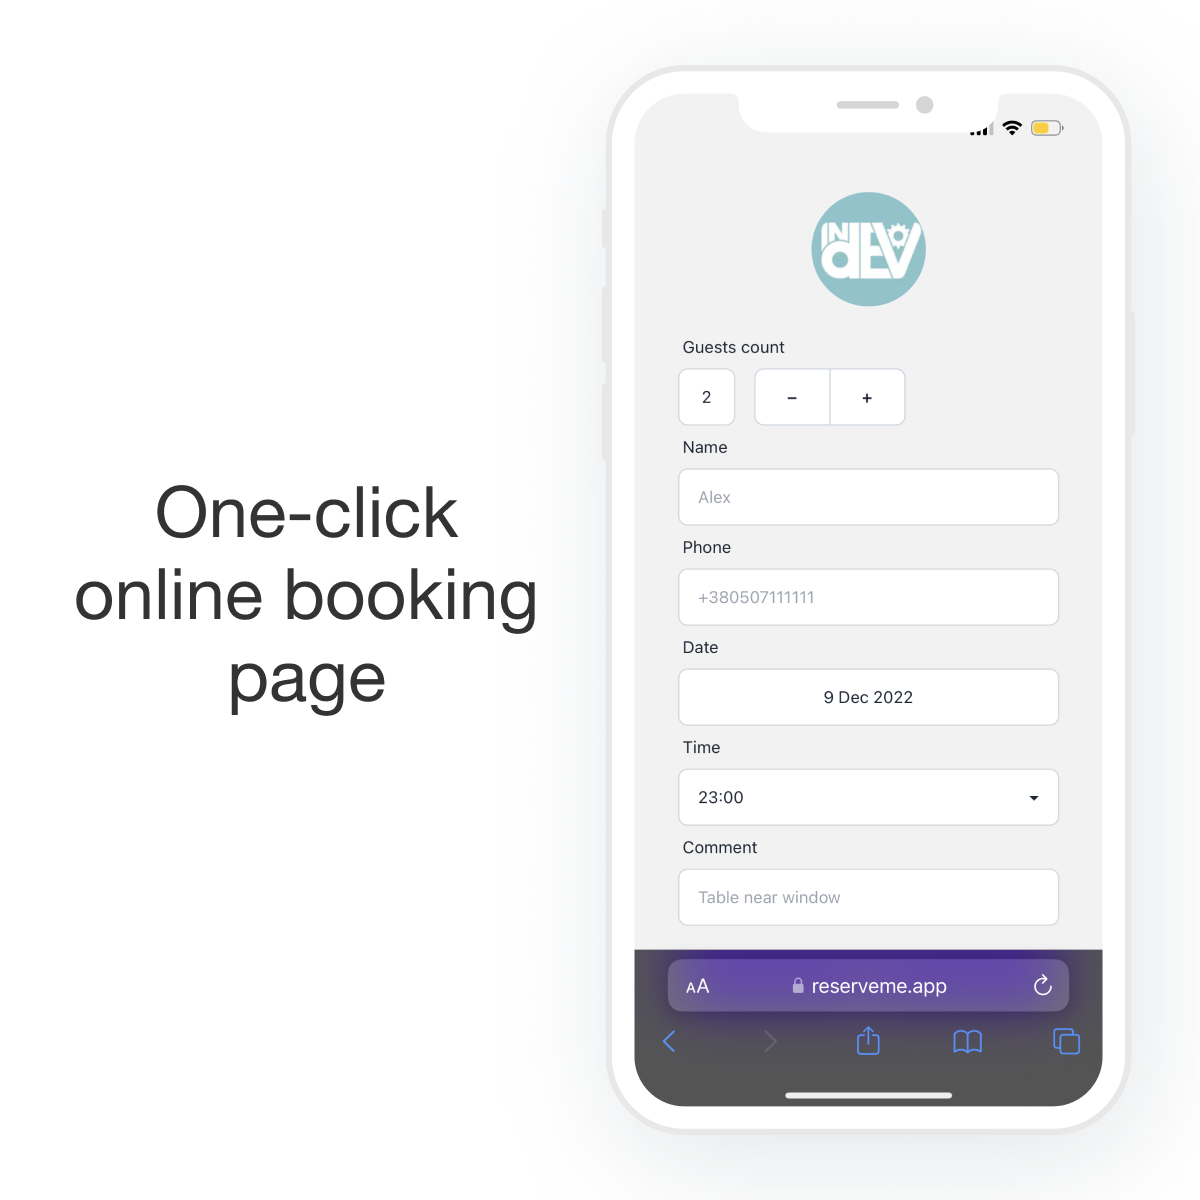 One-click online booking